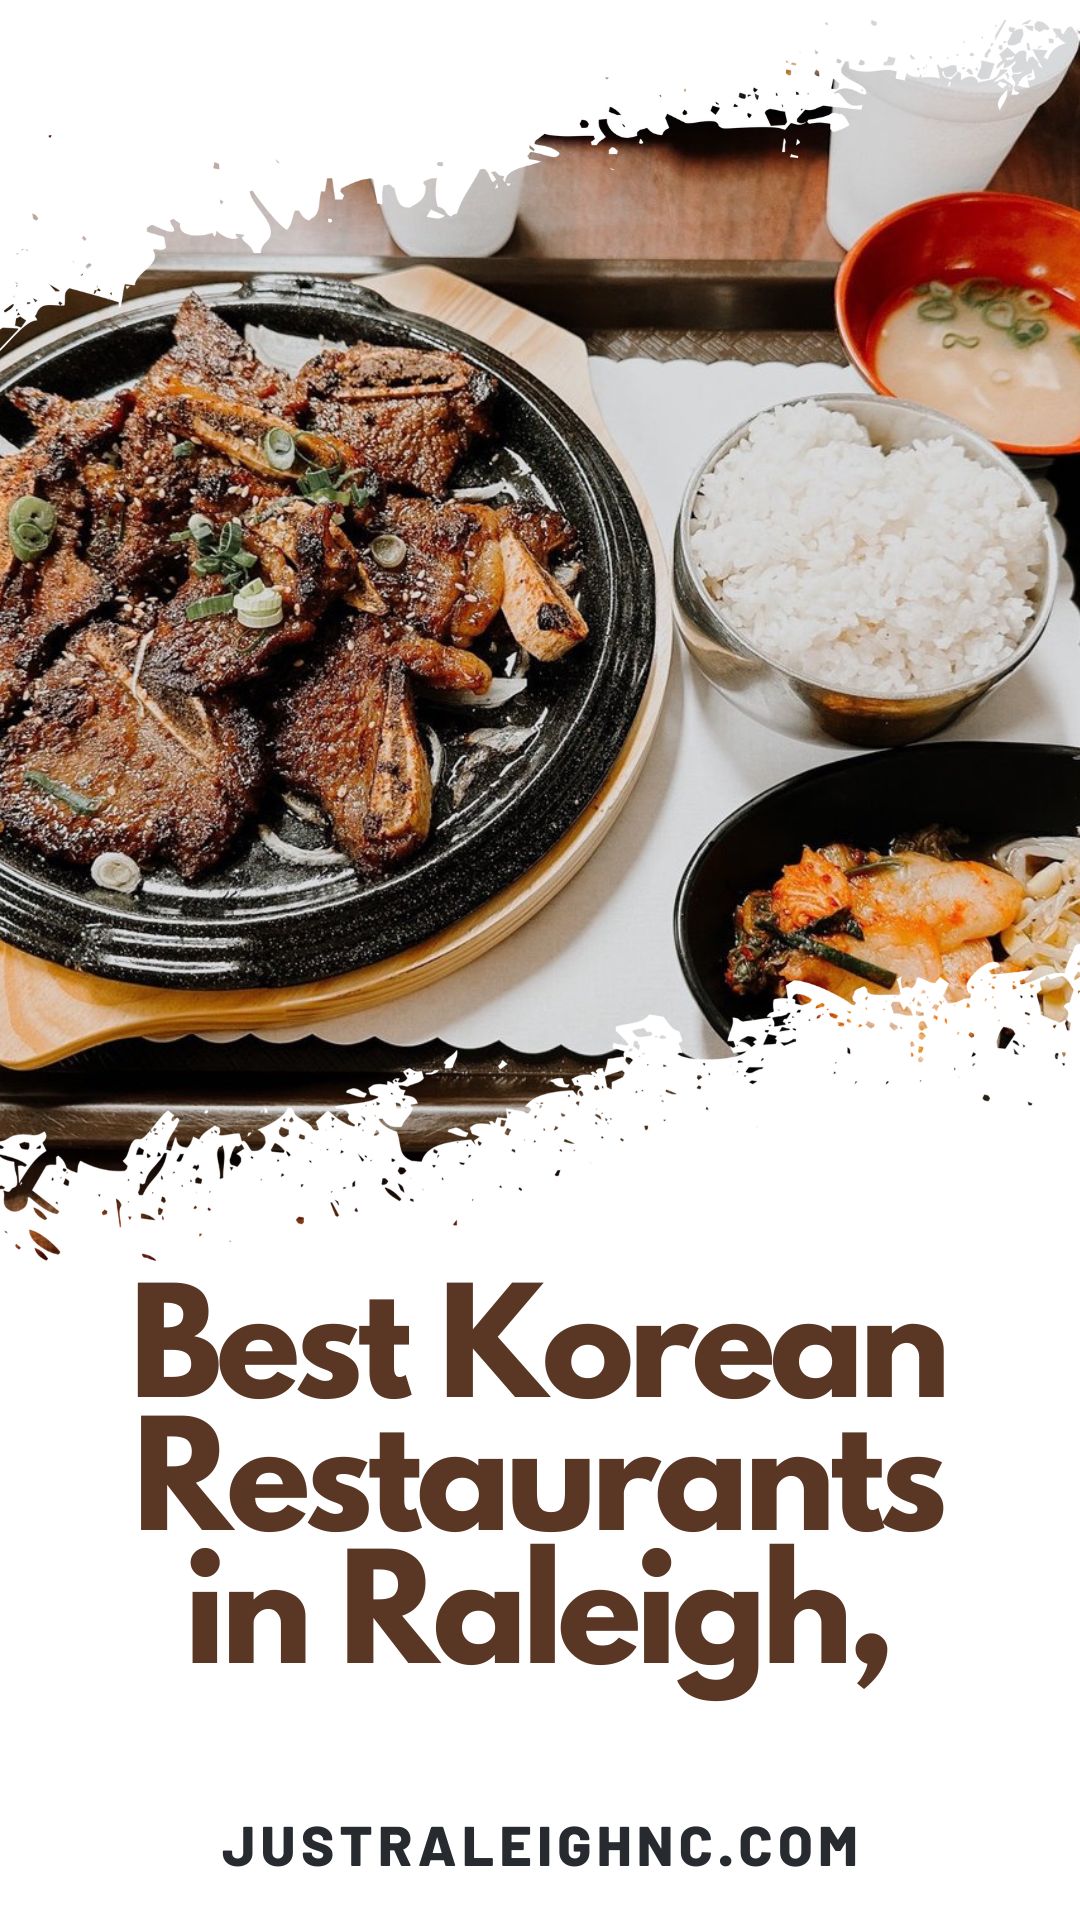 The Best Korean Restaurants in Raleigh, NC: Discover the Culinary